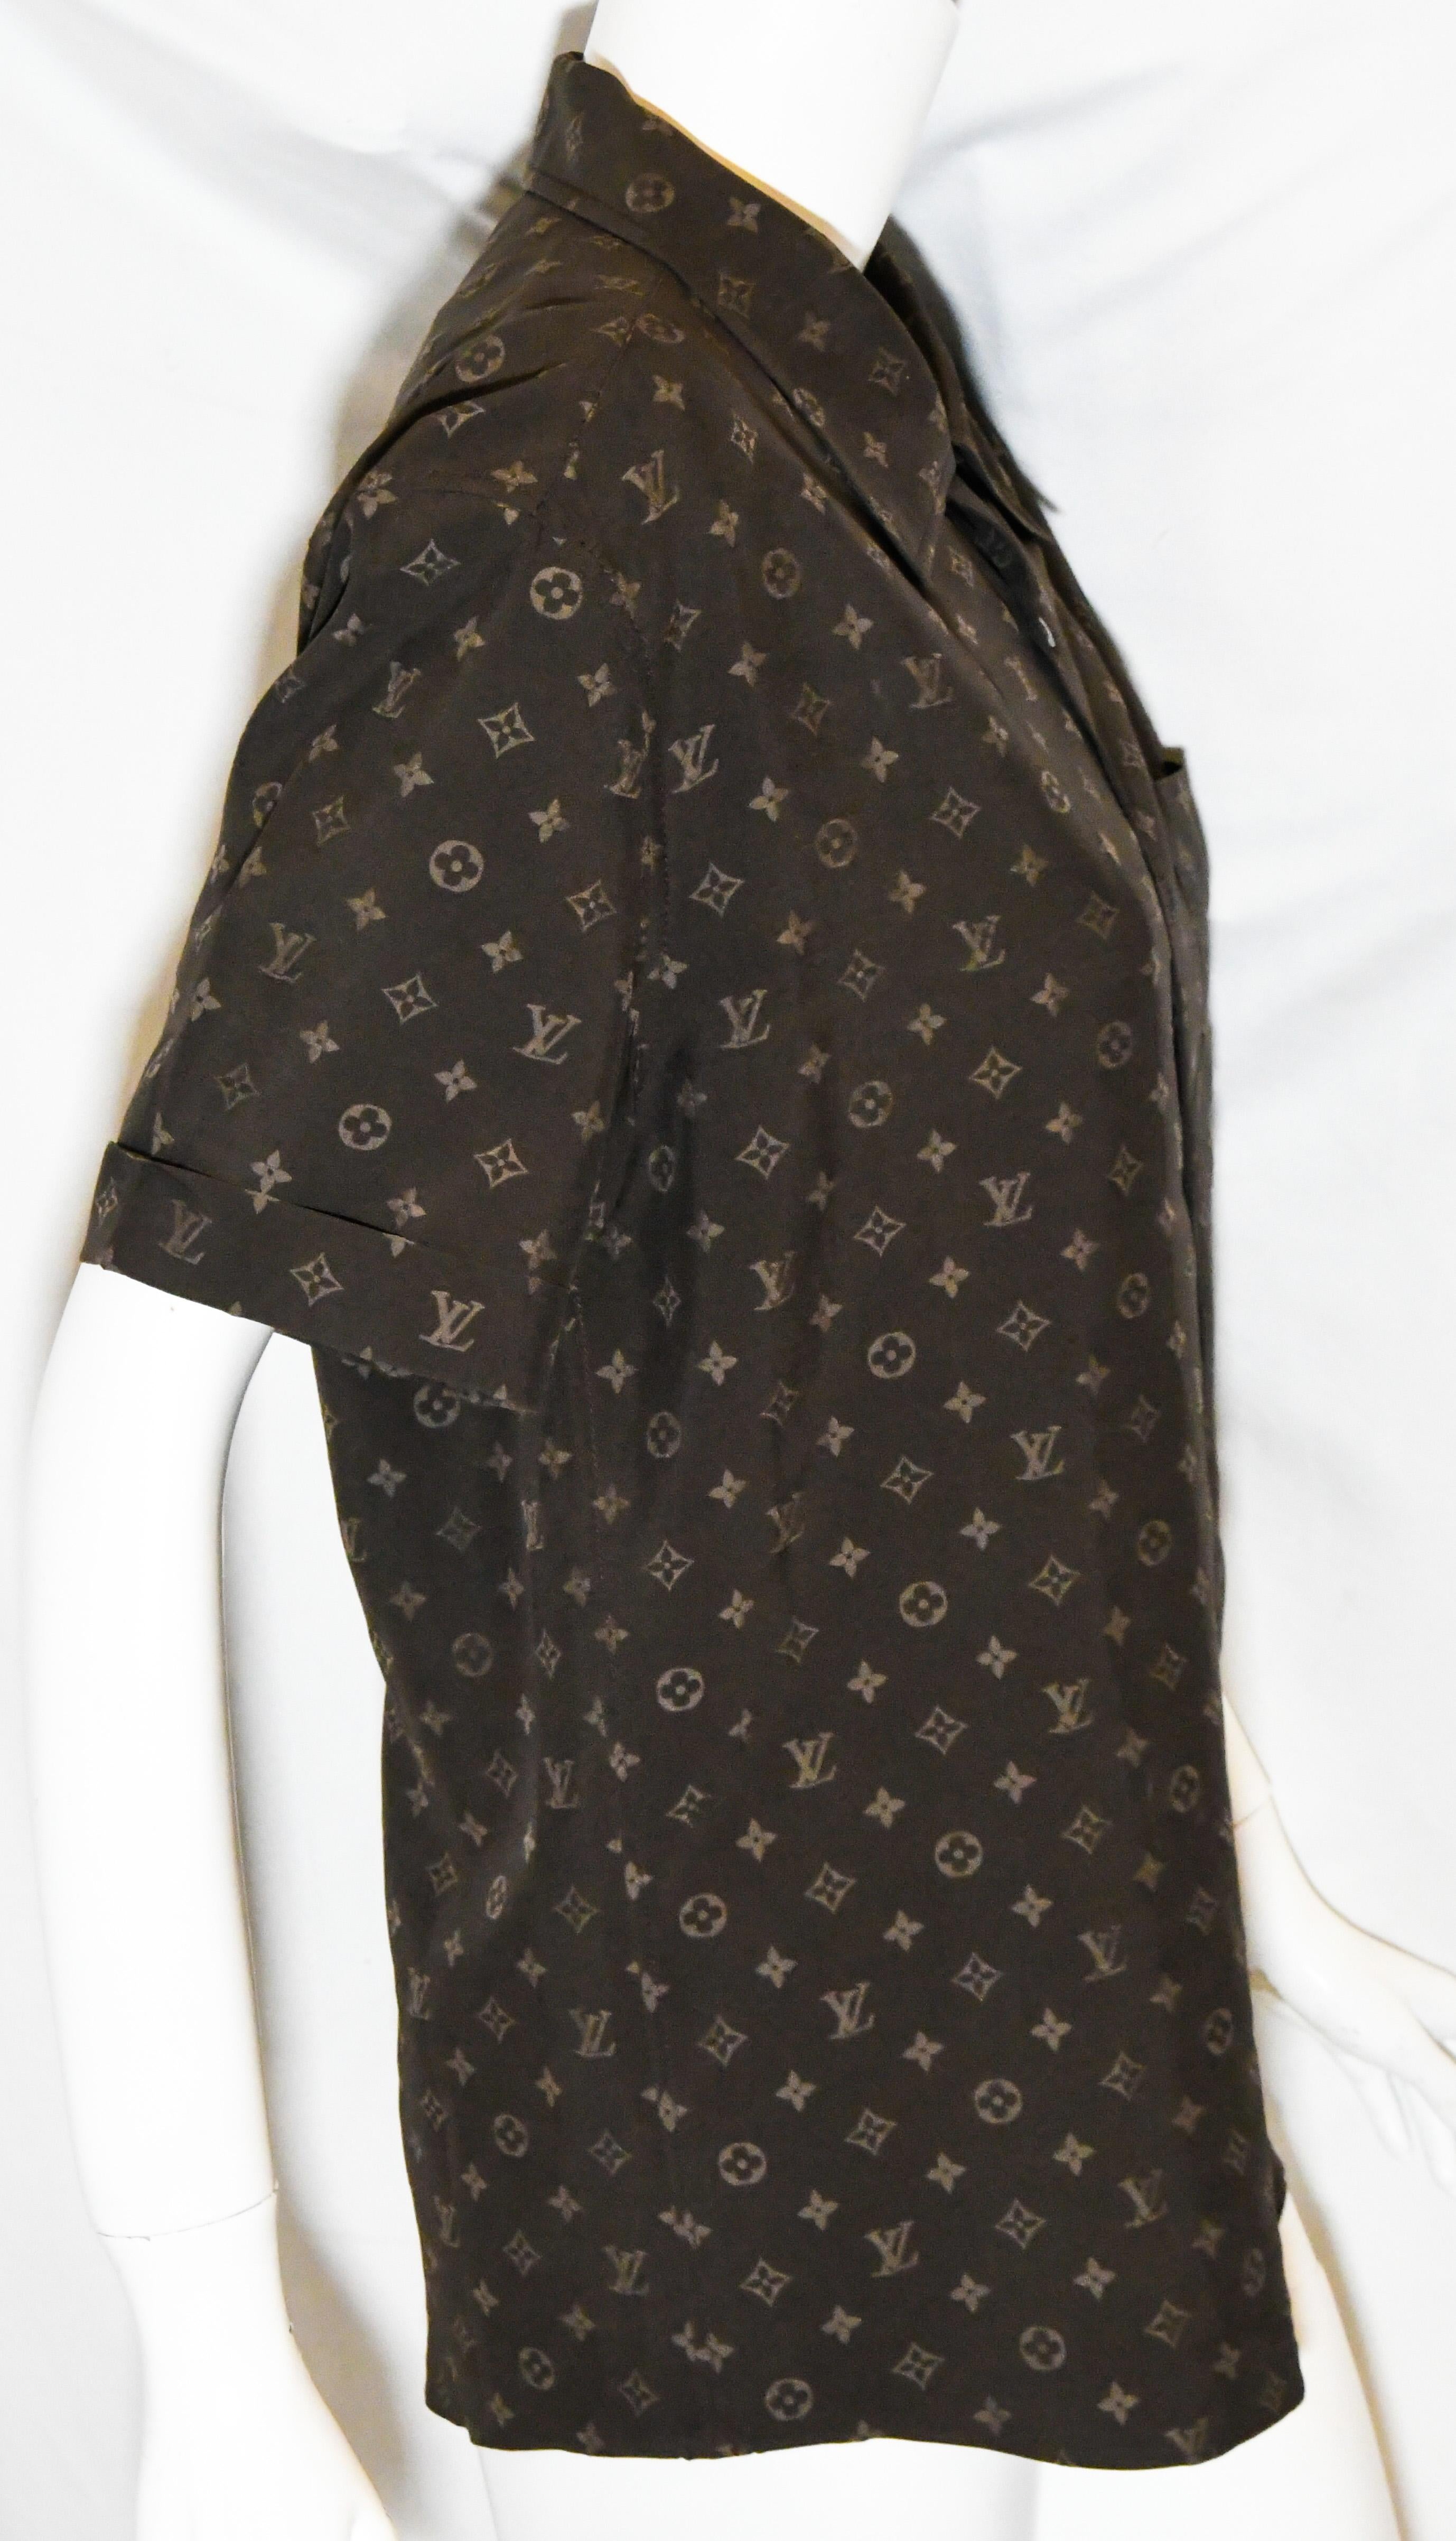 Louis Vuitton monogram brown and beige front button shirt delivers a polished look every time you step out.  It has been designed to offer comfort and a signature look that will set you apart from the crowds. It is crafted from 100% cotton that is